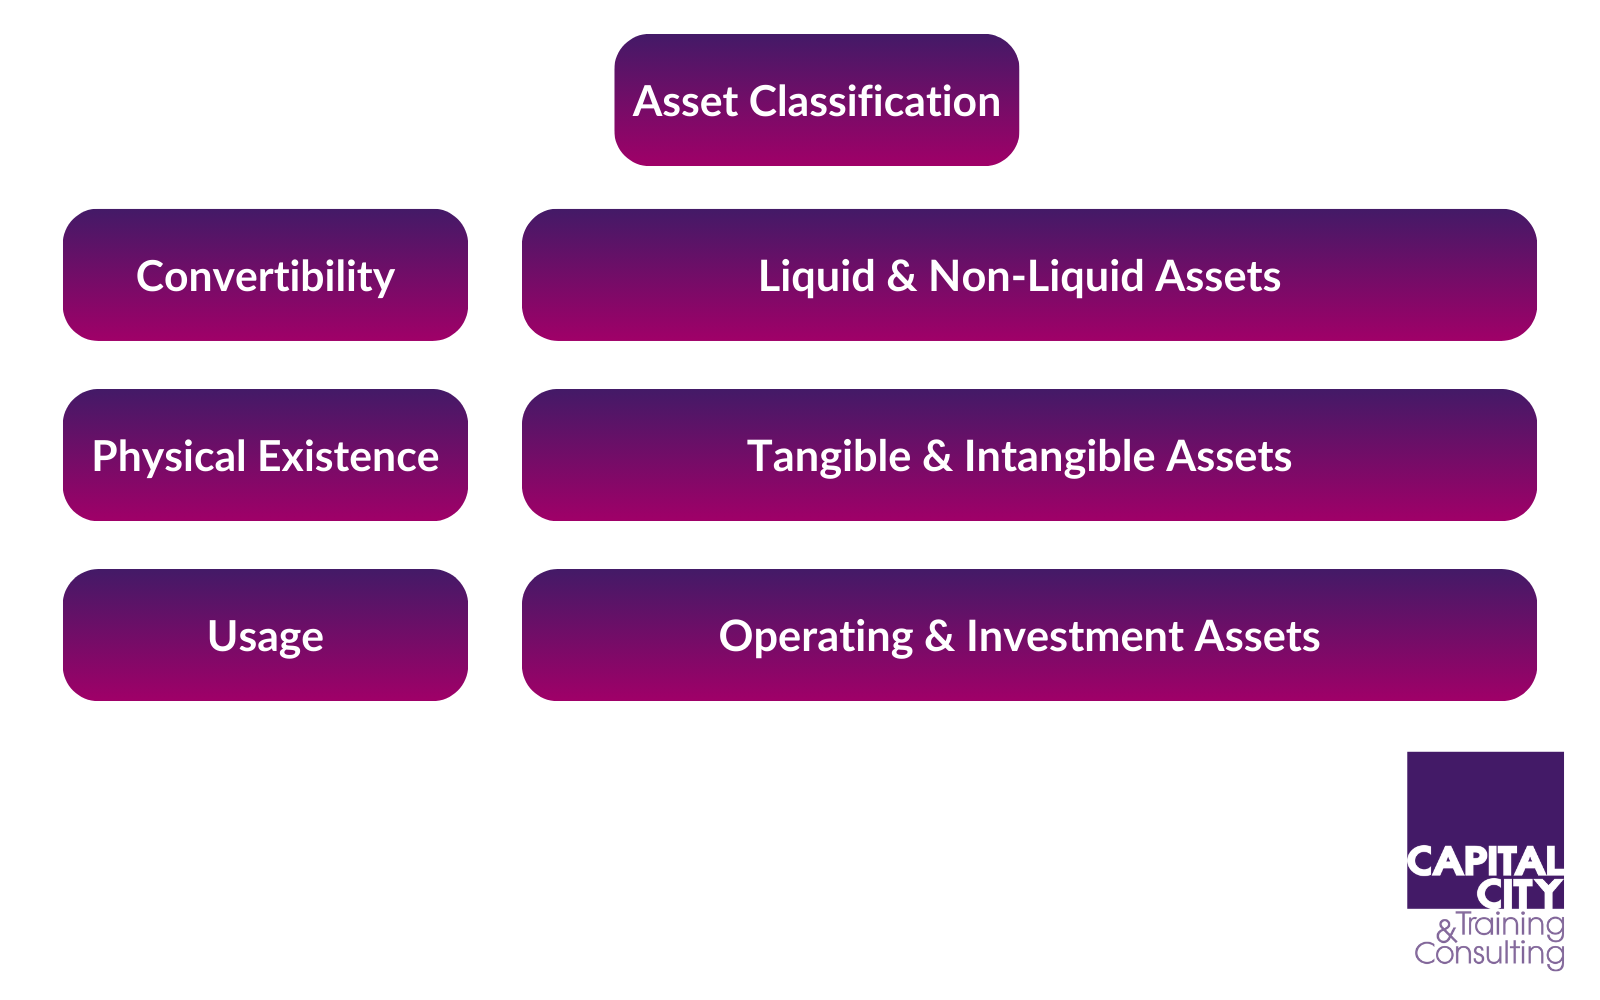 Diagram showing different classification groups for assets based on convertibility, physical existence and usage